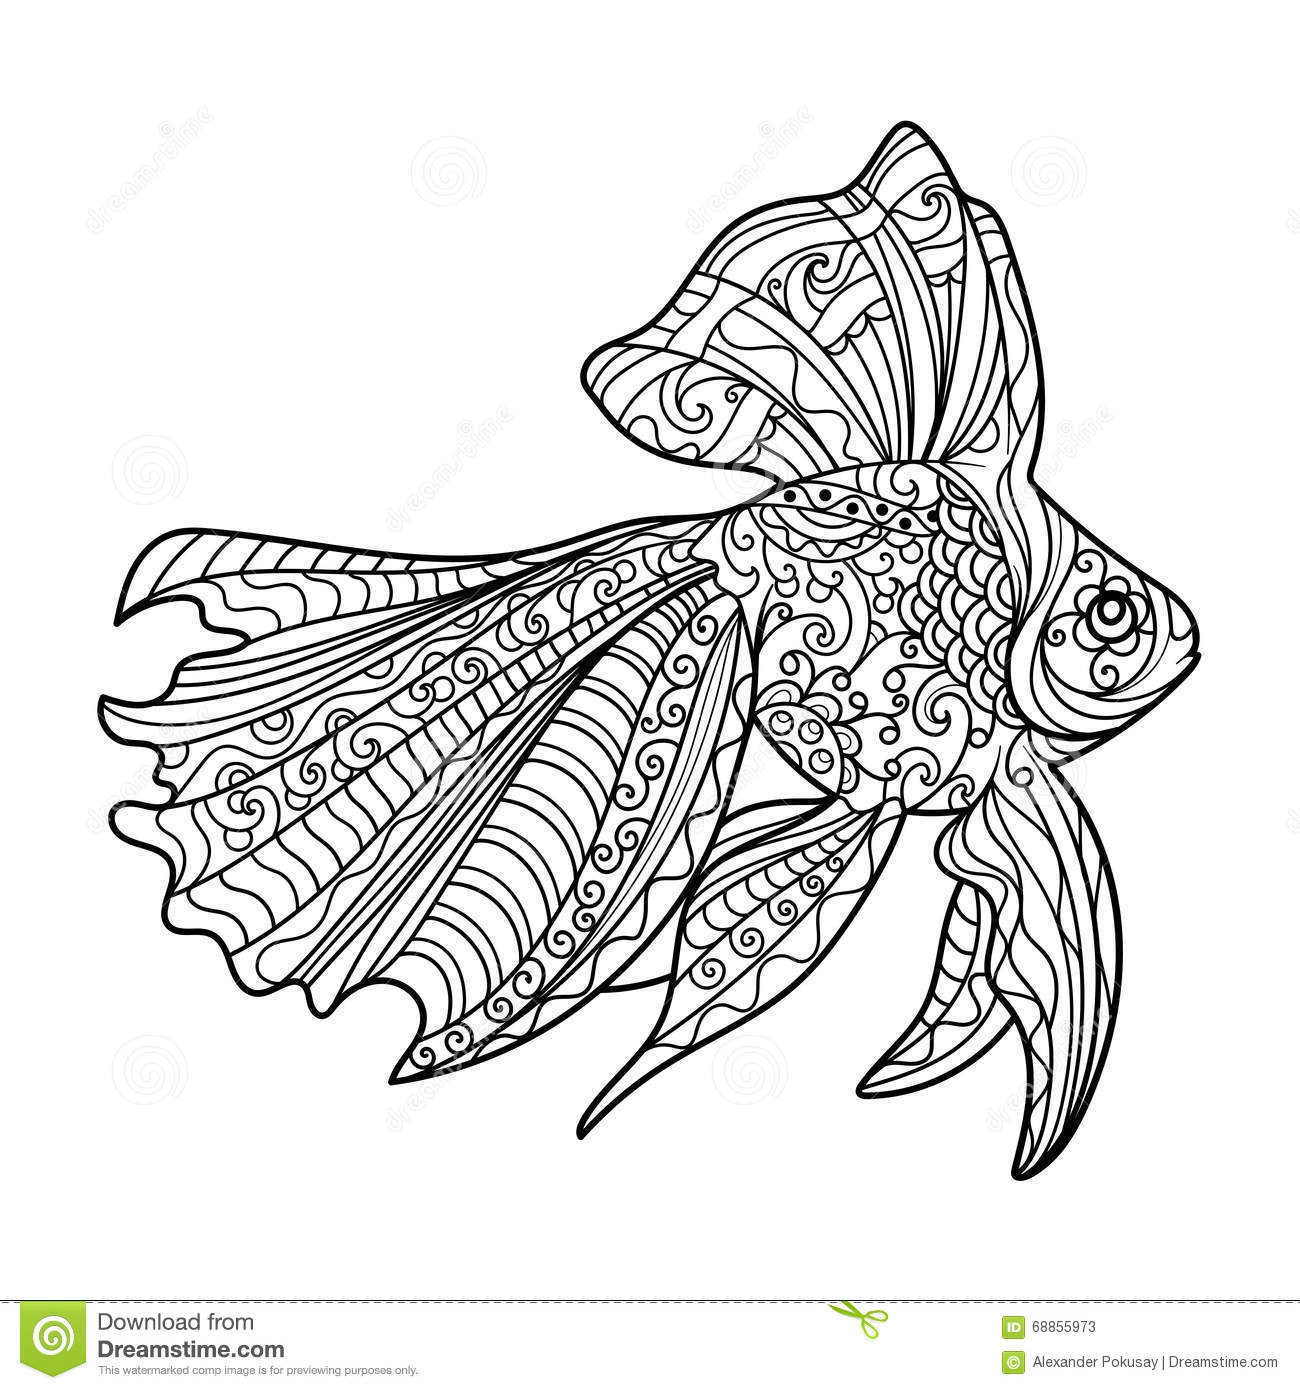 Fish Adult Coloring Pages
 Gold Fish Coloring Book For Adults Vector Stock Vector